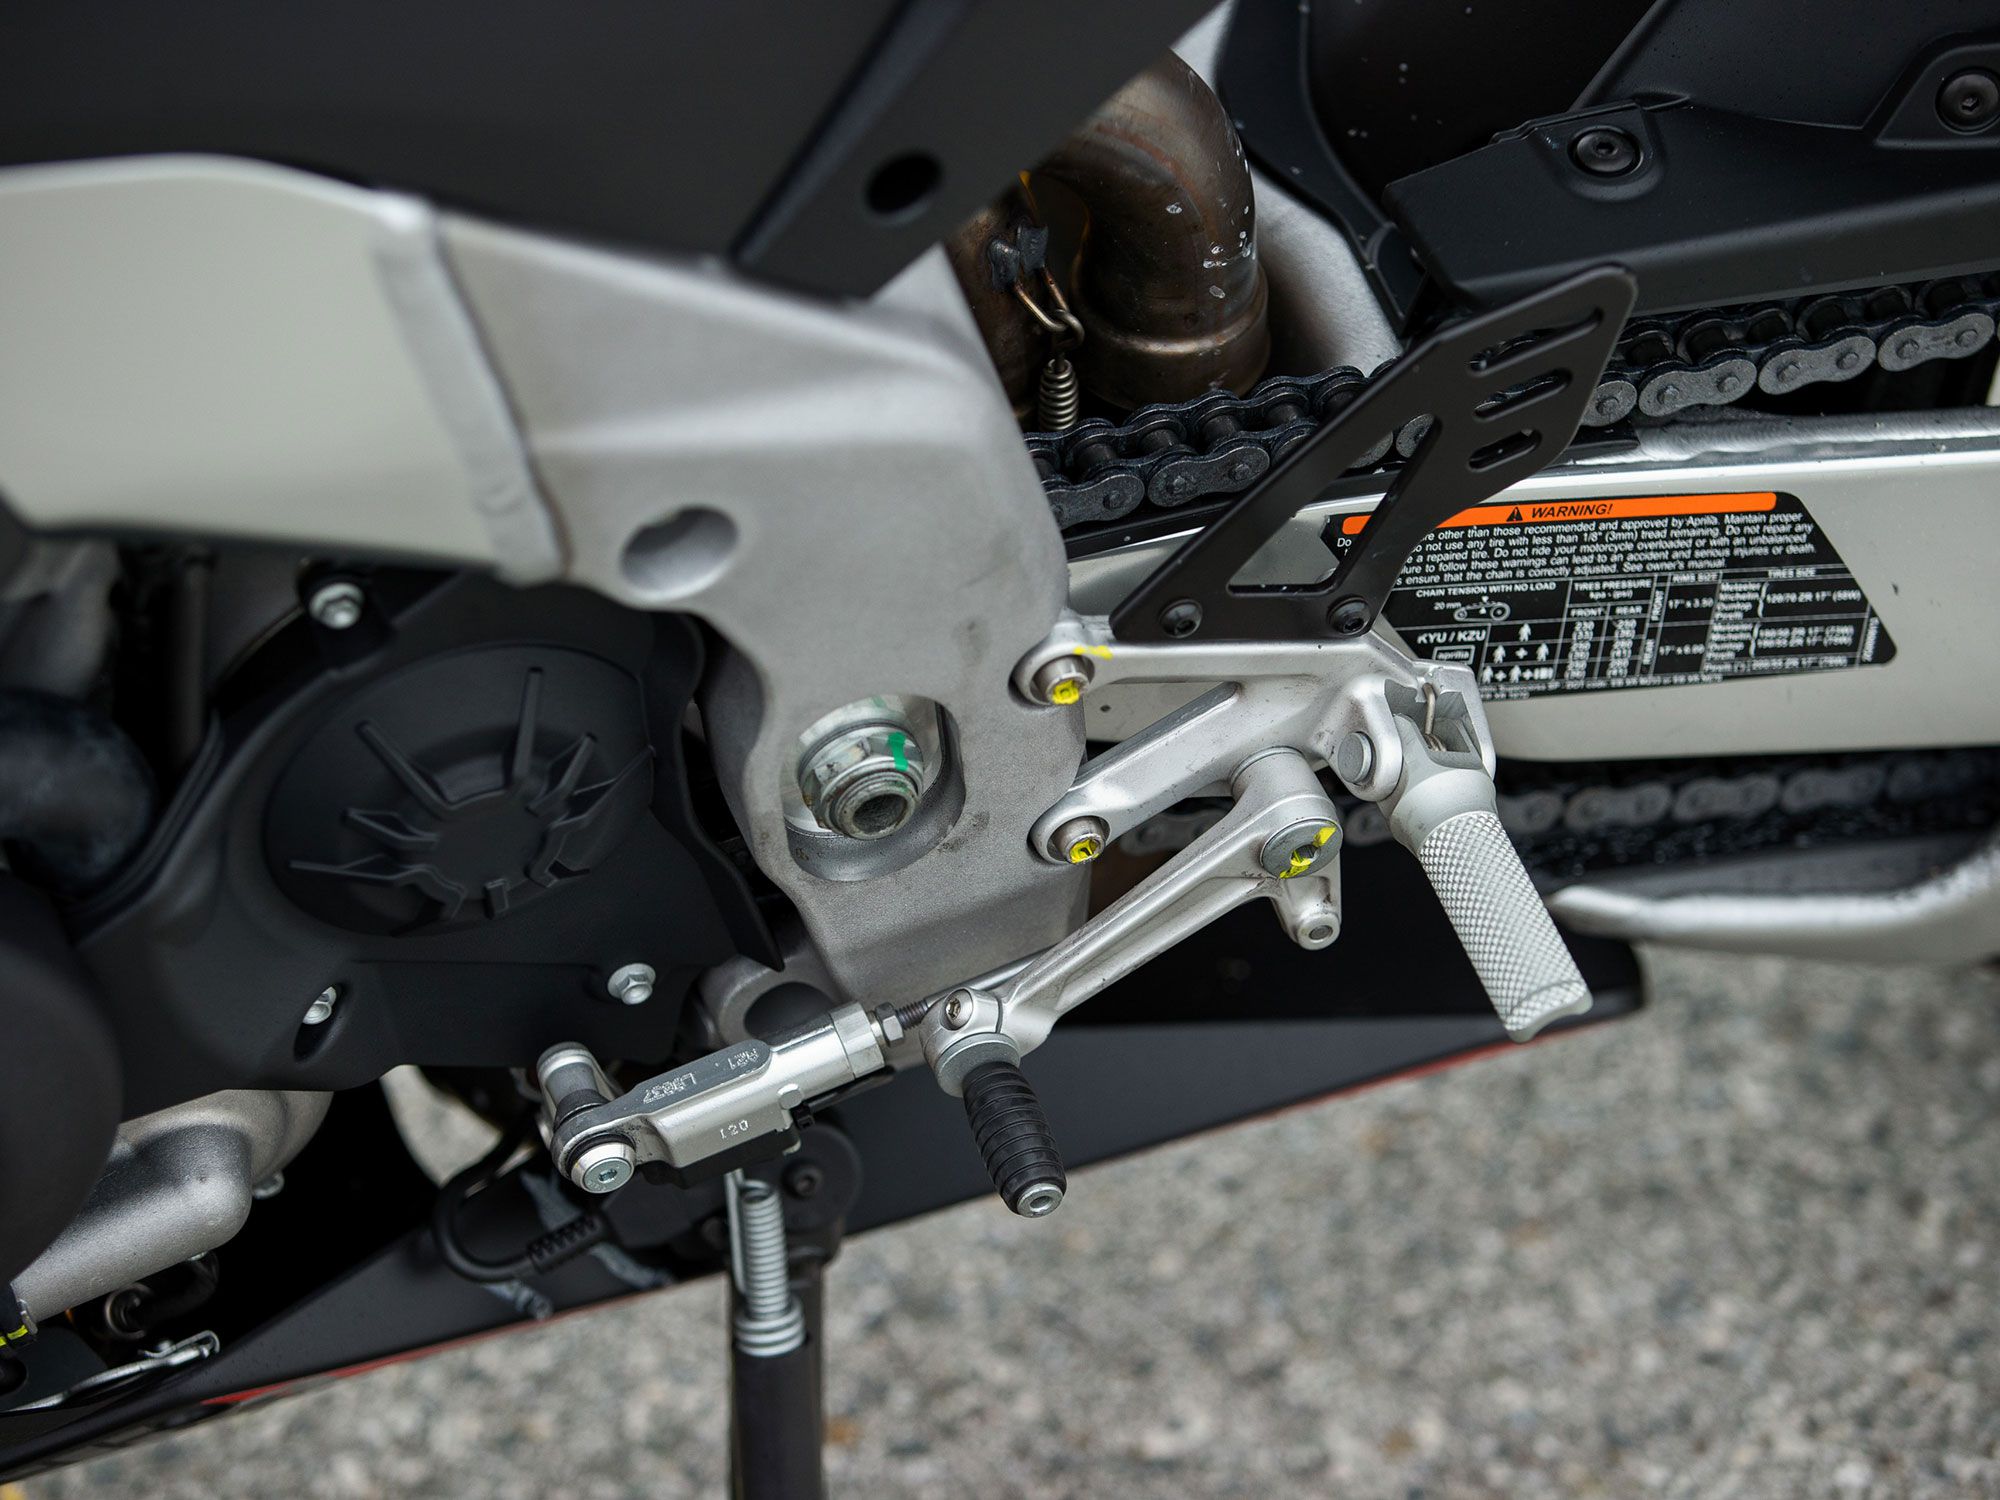 The rider’s foot controls are lower which make it easier to get comfortable for taller riders. In spite of this change, Aprilia claims cornering ground clearance has increased.